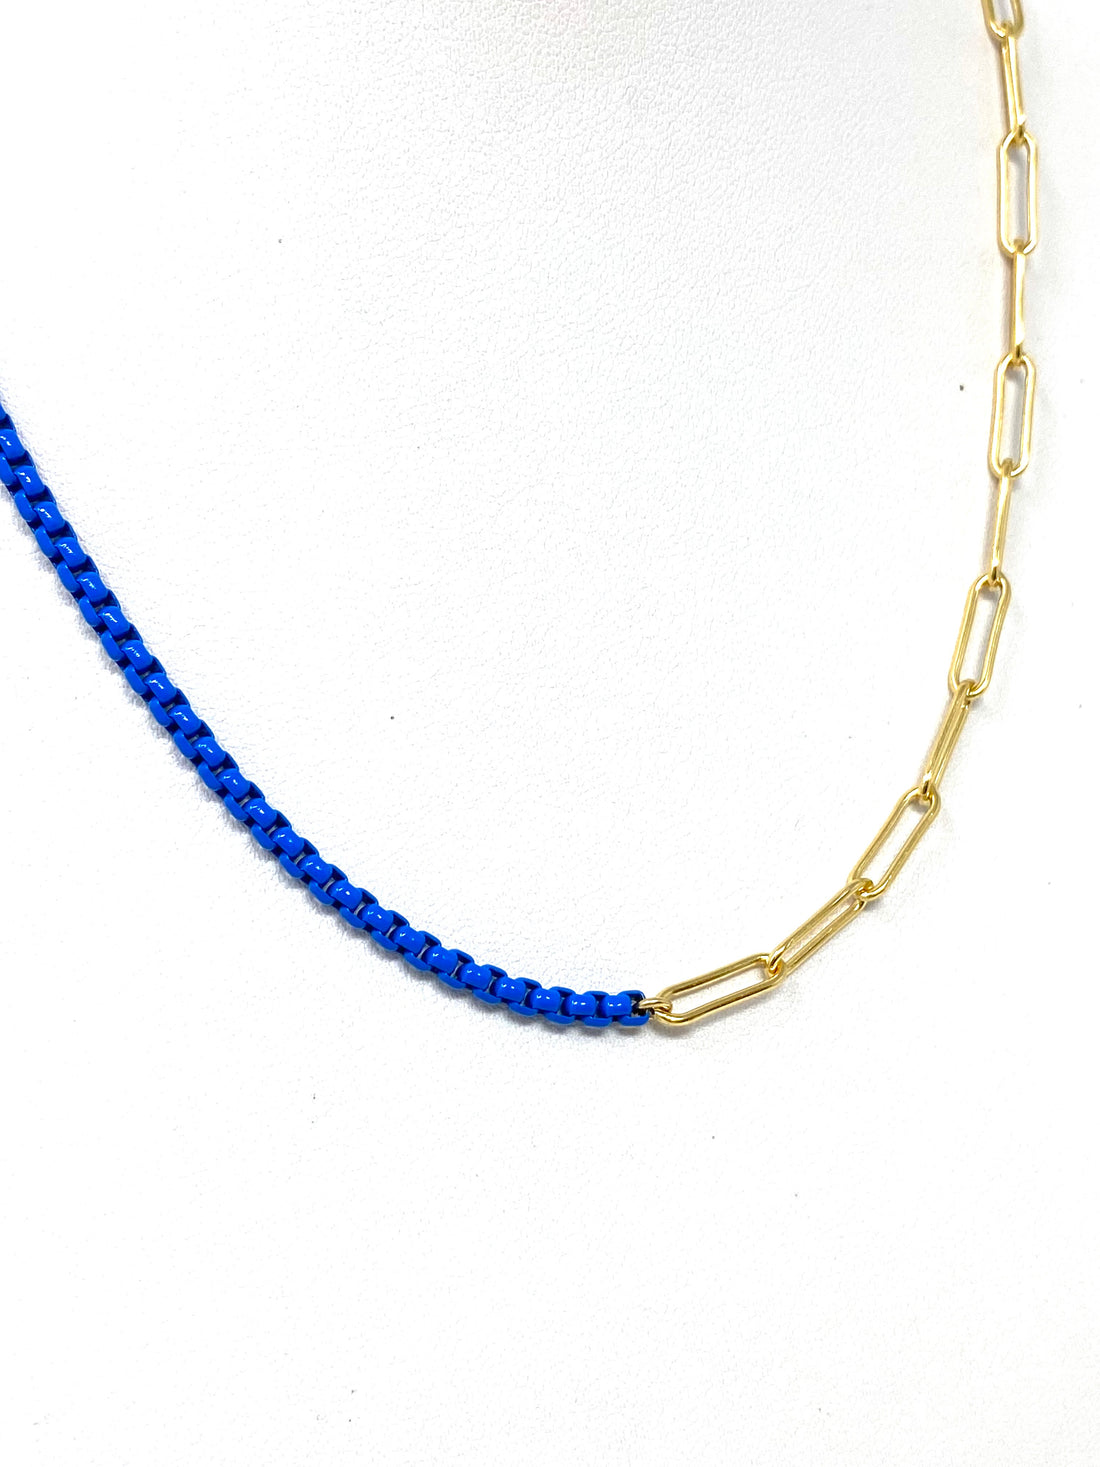 Going Dutch Chain in Cobalt with Gold Chainlink